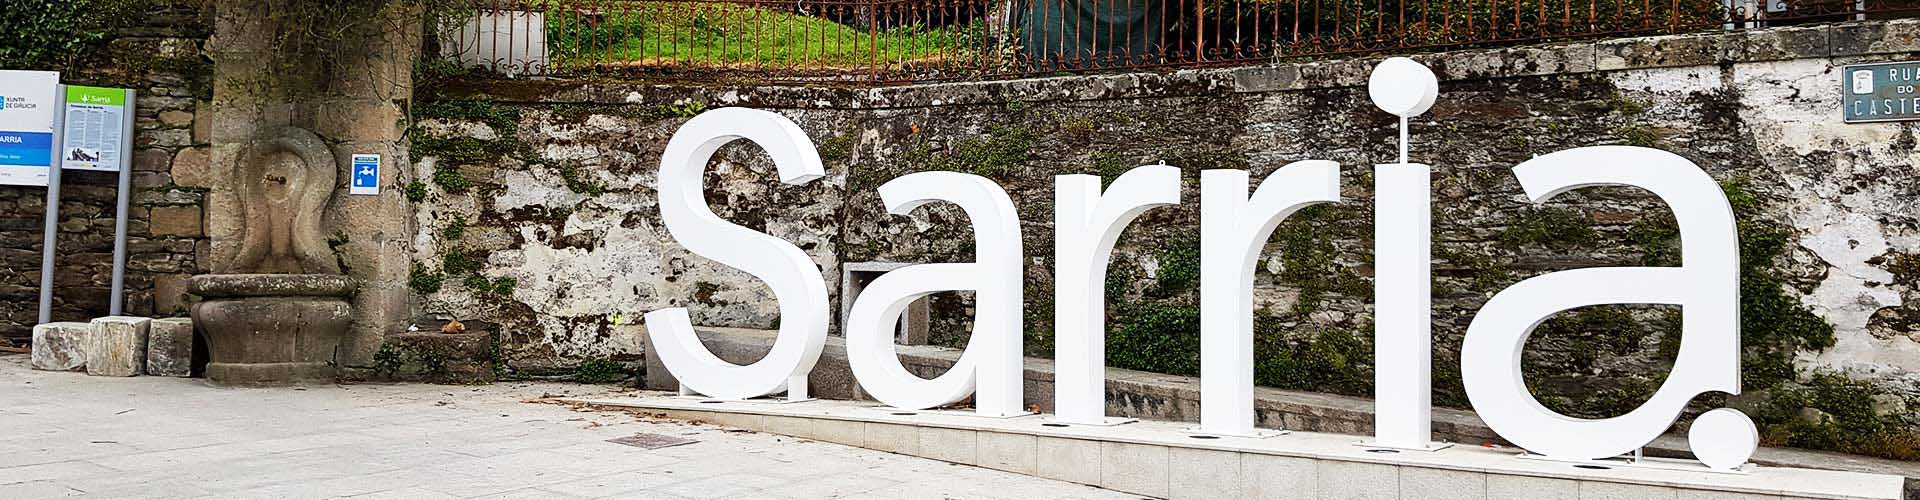 sarria sign in town